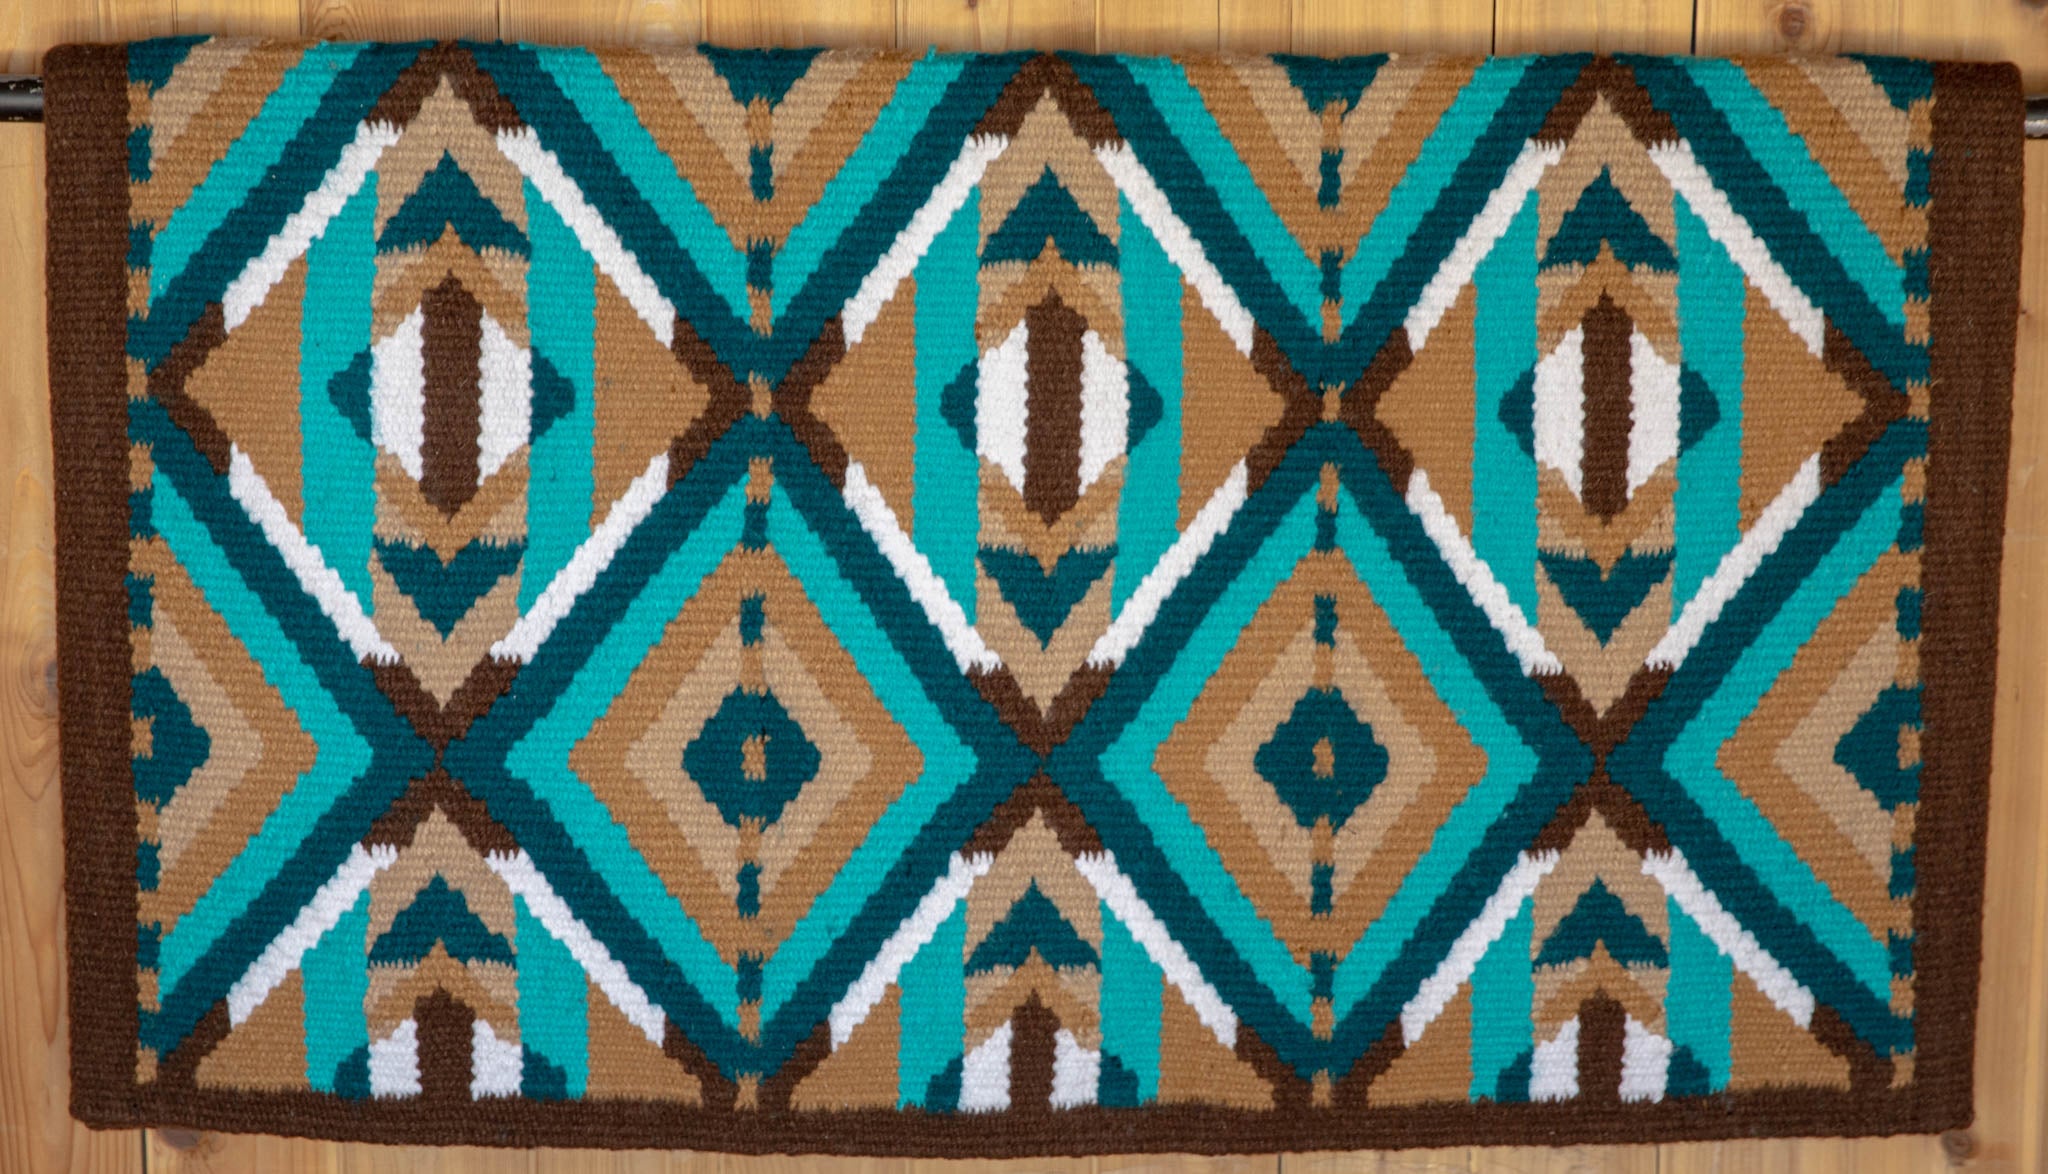 Brown, Tan, Dark & Light Teal w/ White Accents Flat Show Blanket